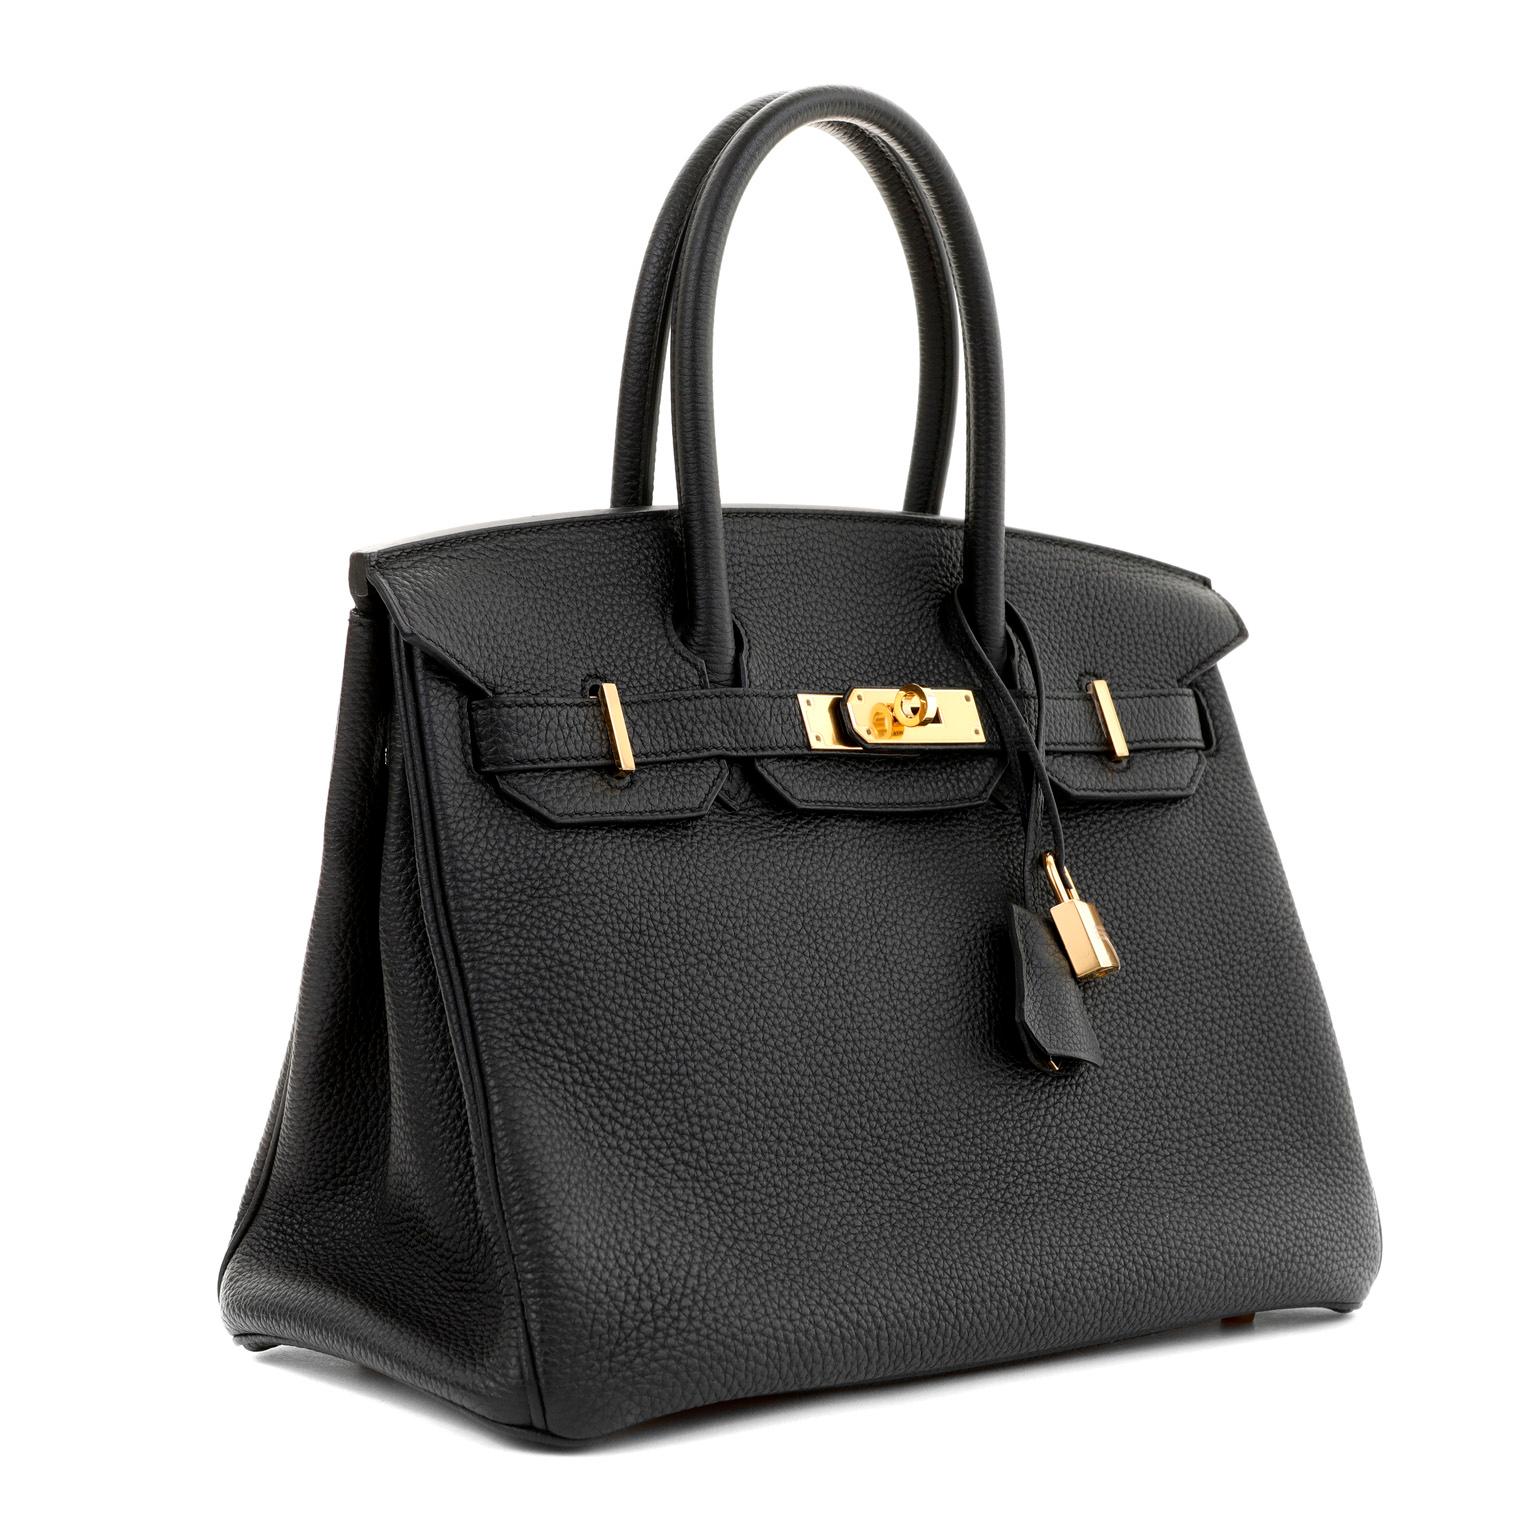 This authentic Hermès Black Togo Leather 30 cm Birkin Bag is in pristine unworn condition.  The protective plastic remains intact on  the hardware.

Togo is scratch resistant calf leather; it is textured with a wonderful grainy appearance.  Togo is